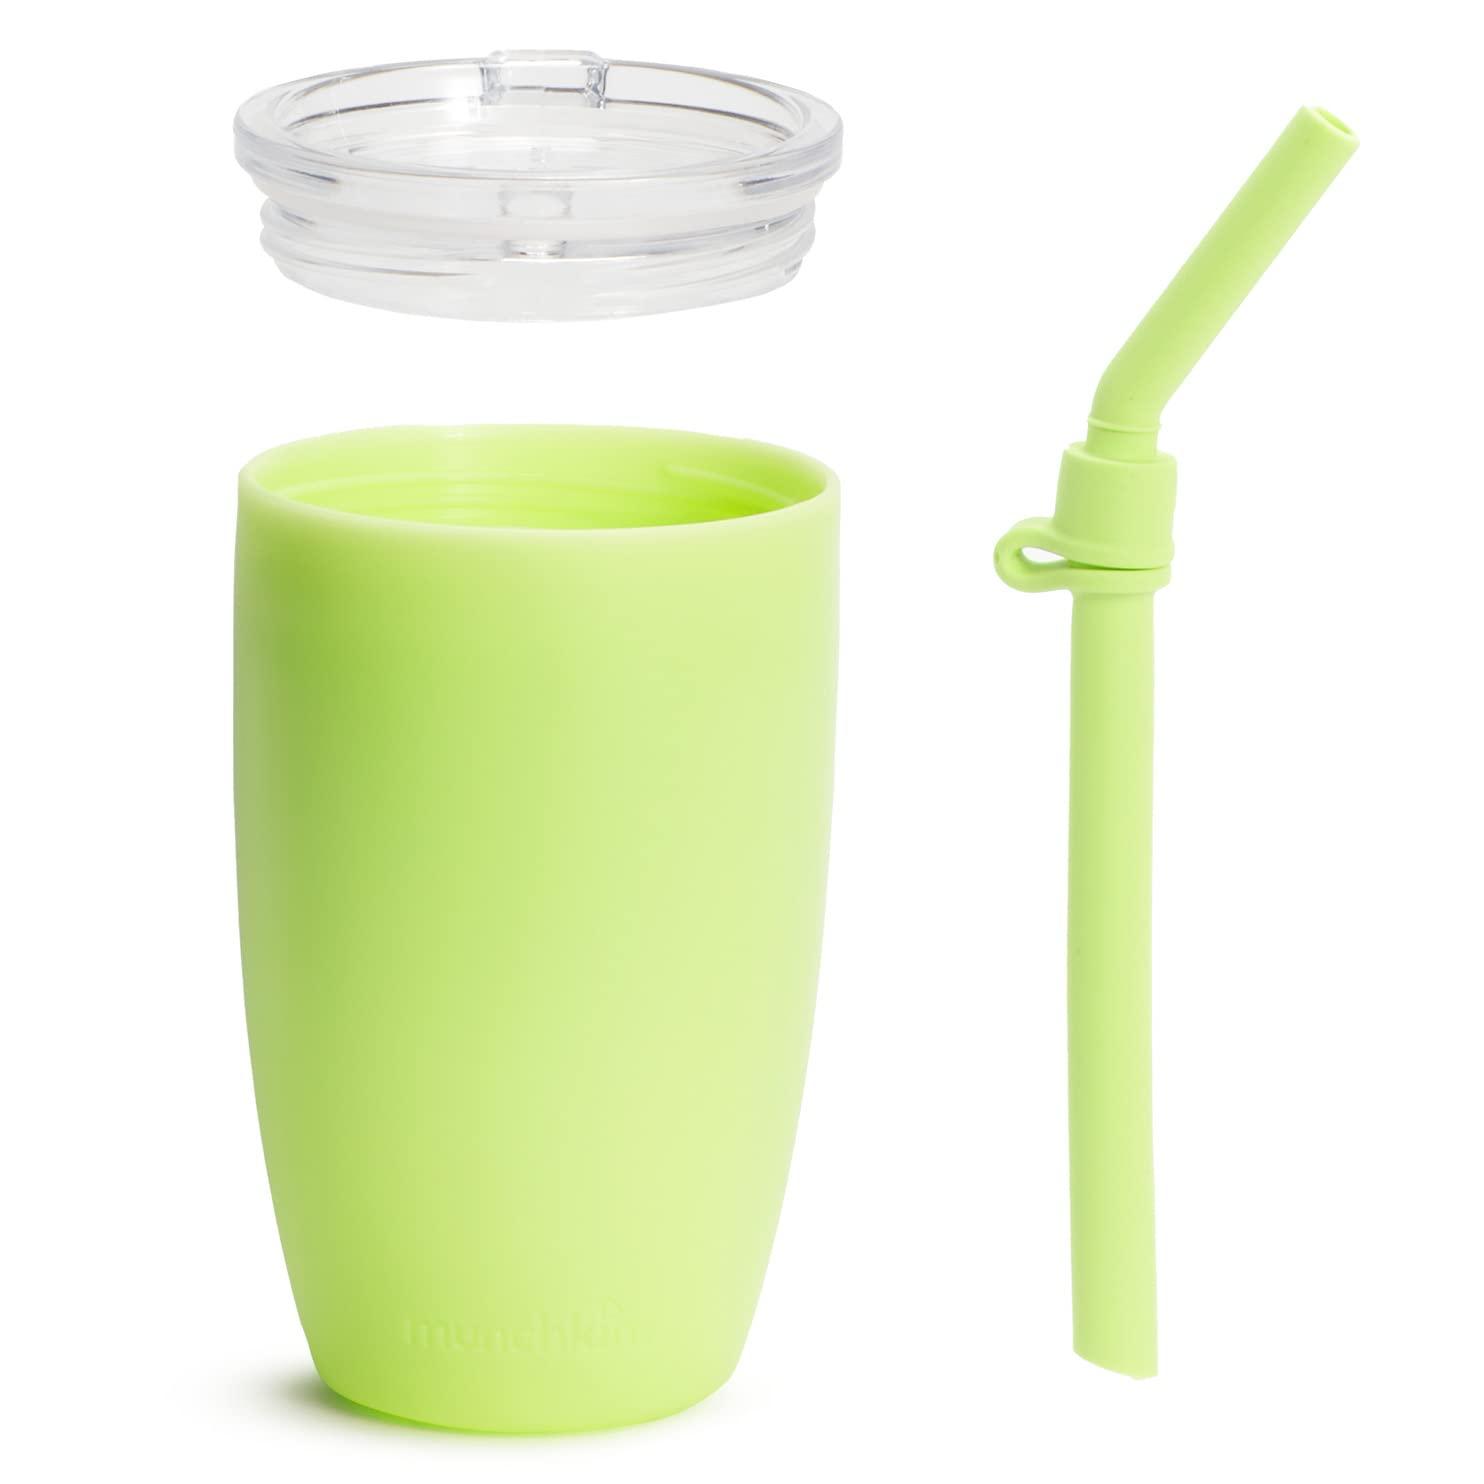 Munchkin Simple Clean Straw Cup, 10oz, Blue/Green, 2 Pack